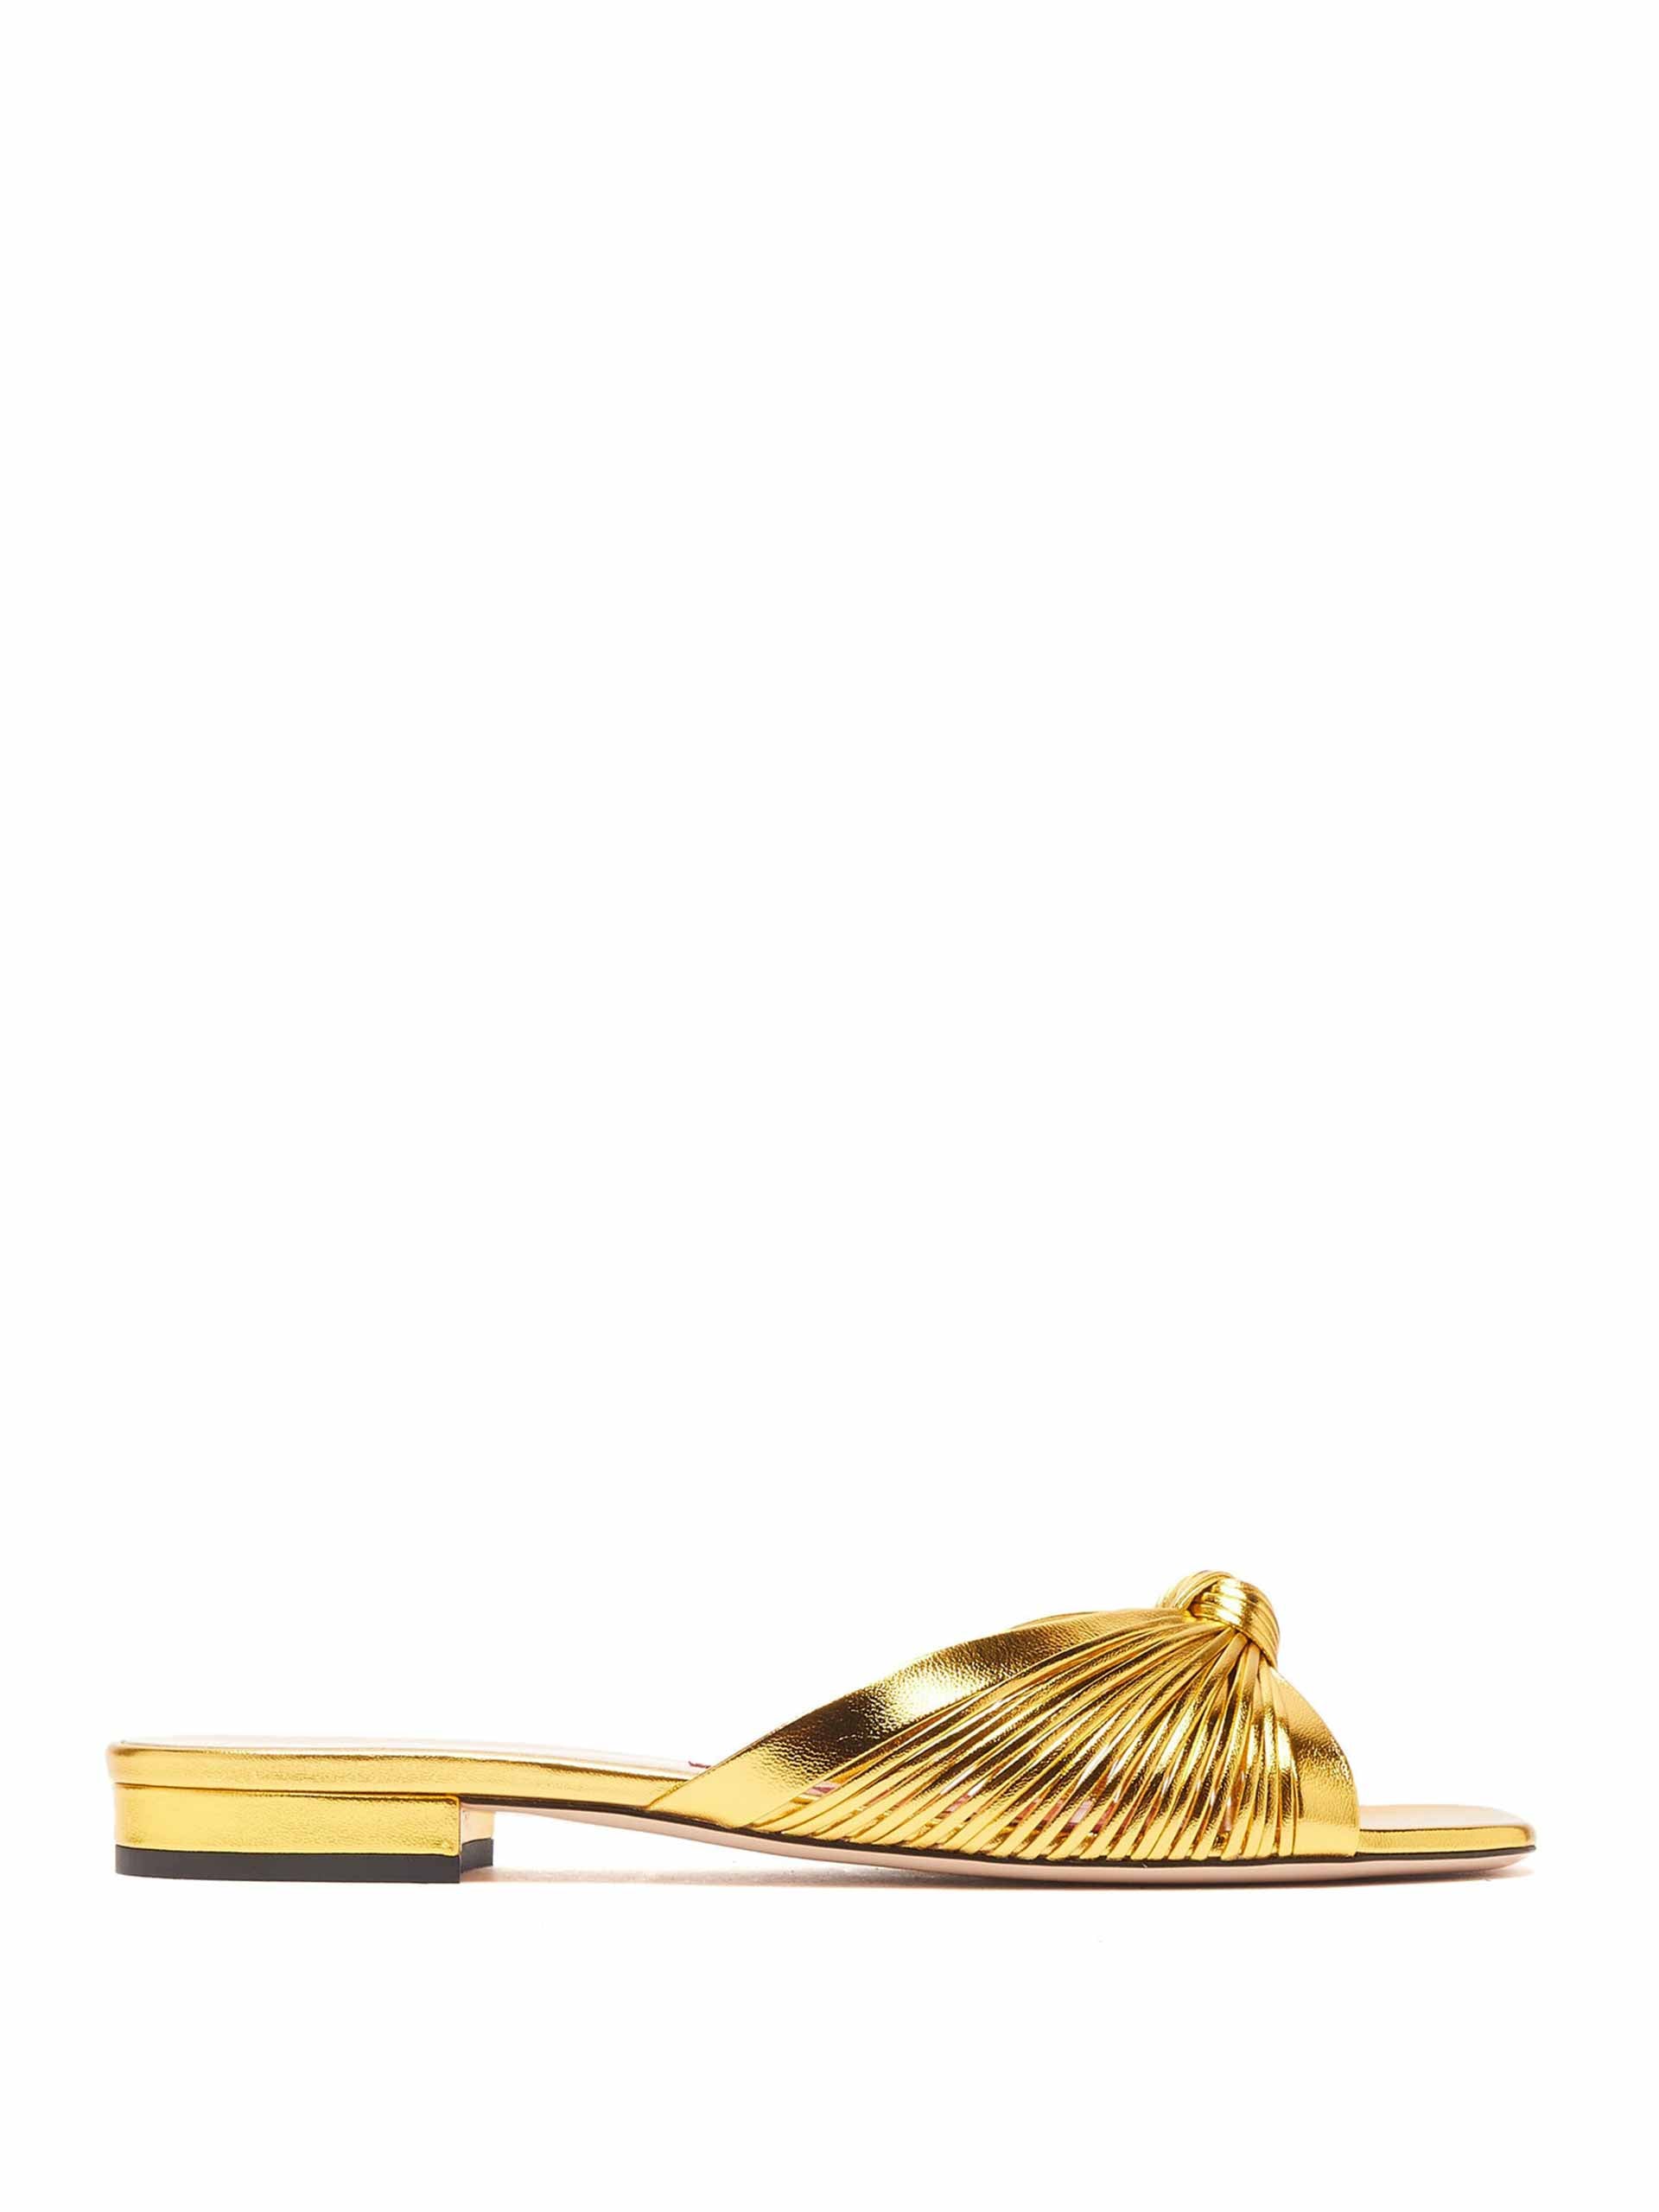 Gold leather slides | Collagerie.com